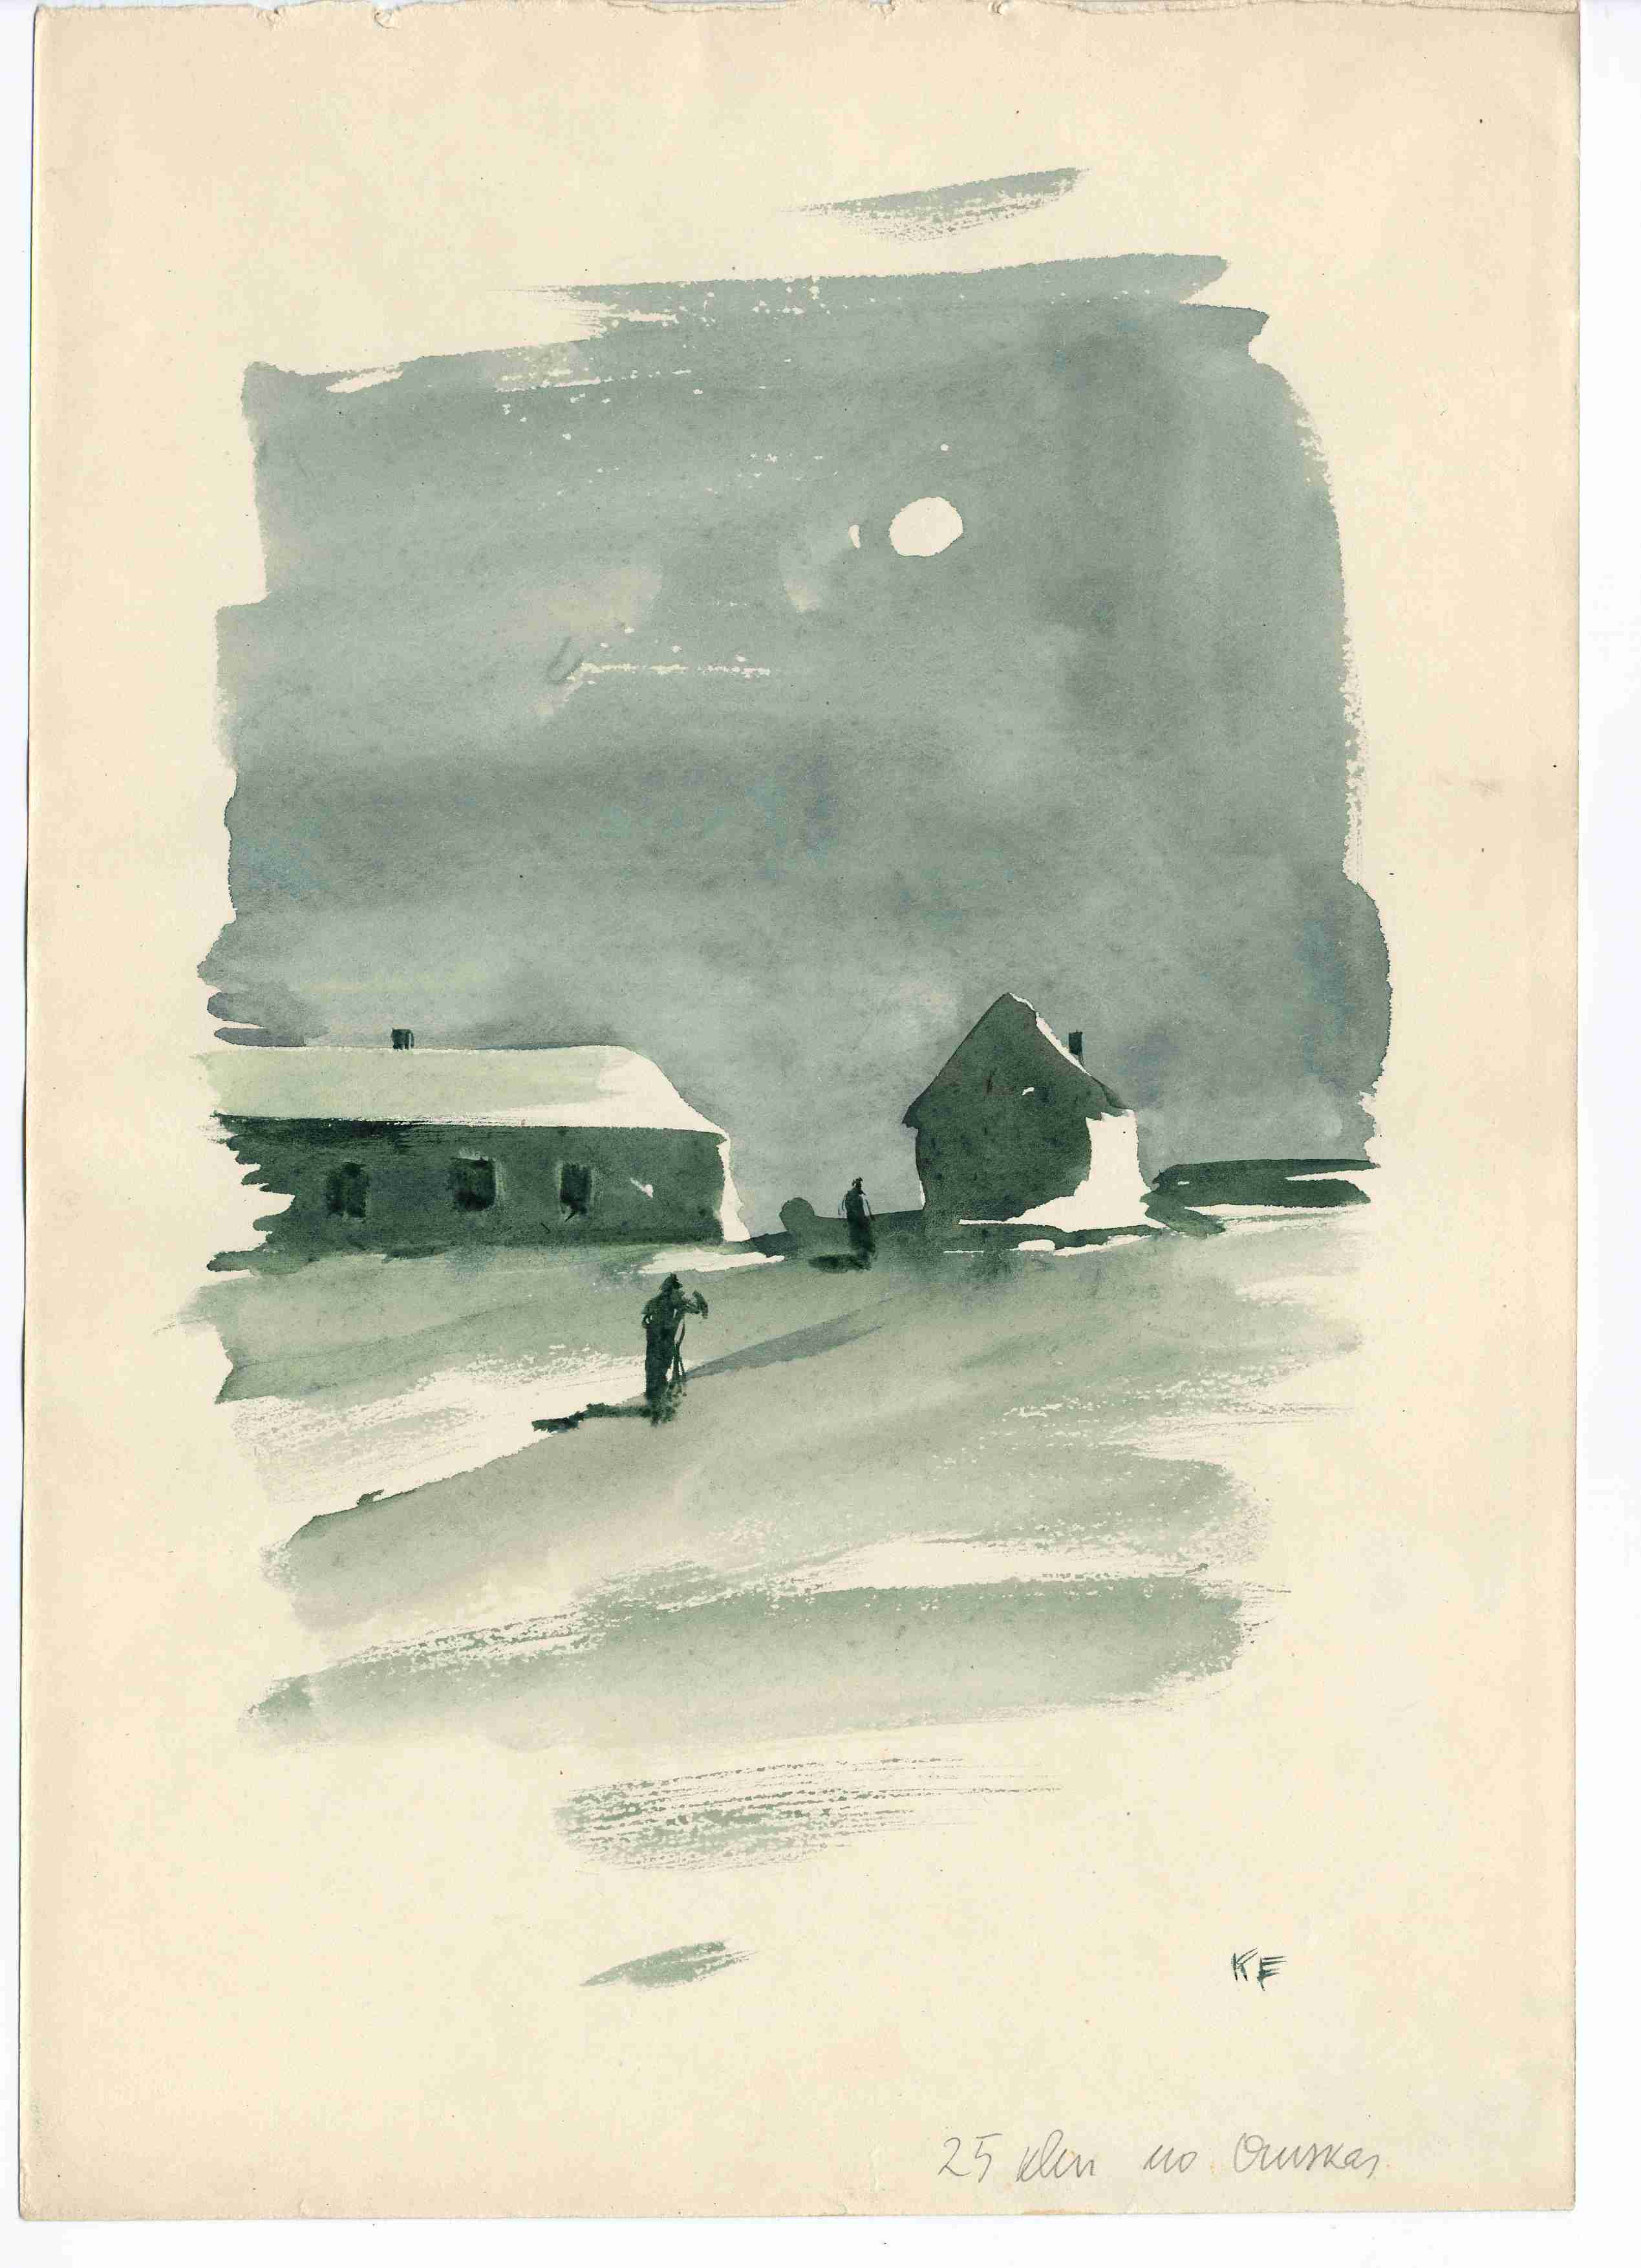 Kurts Fridrihsons. 25 kilometres from Omsk. Painting in water colours, 1951-1956.